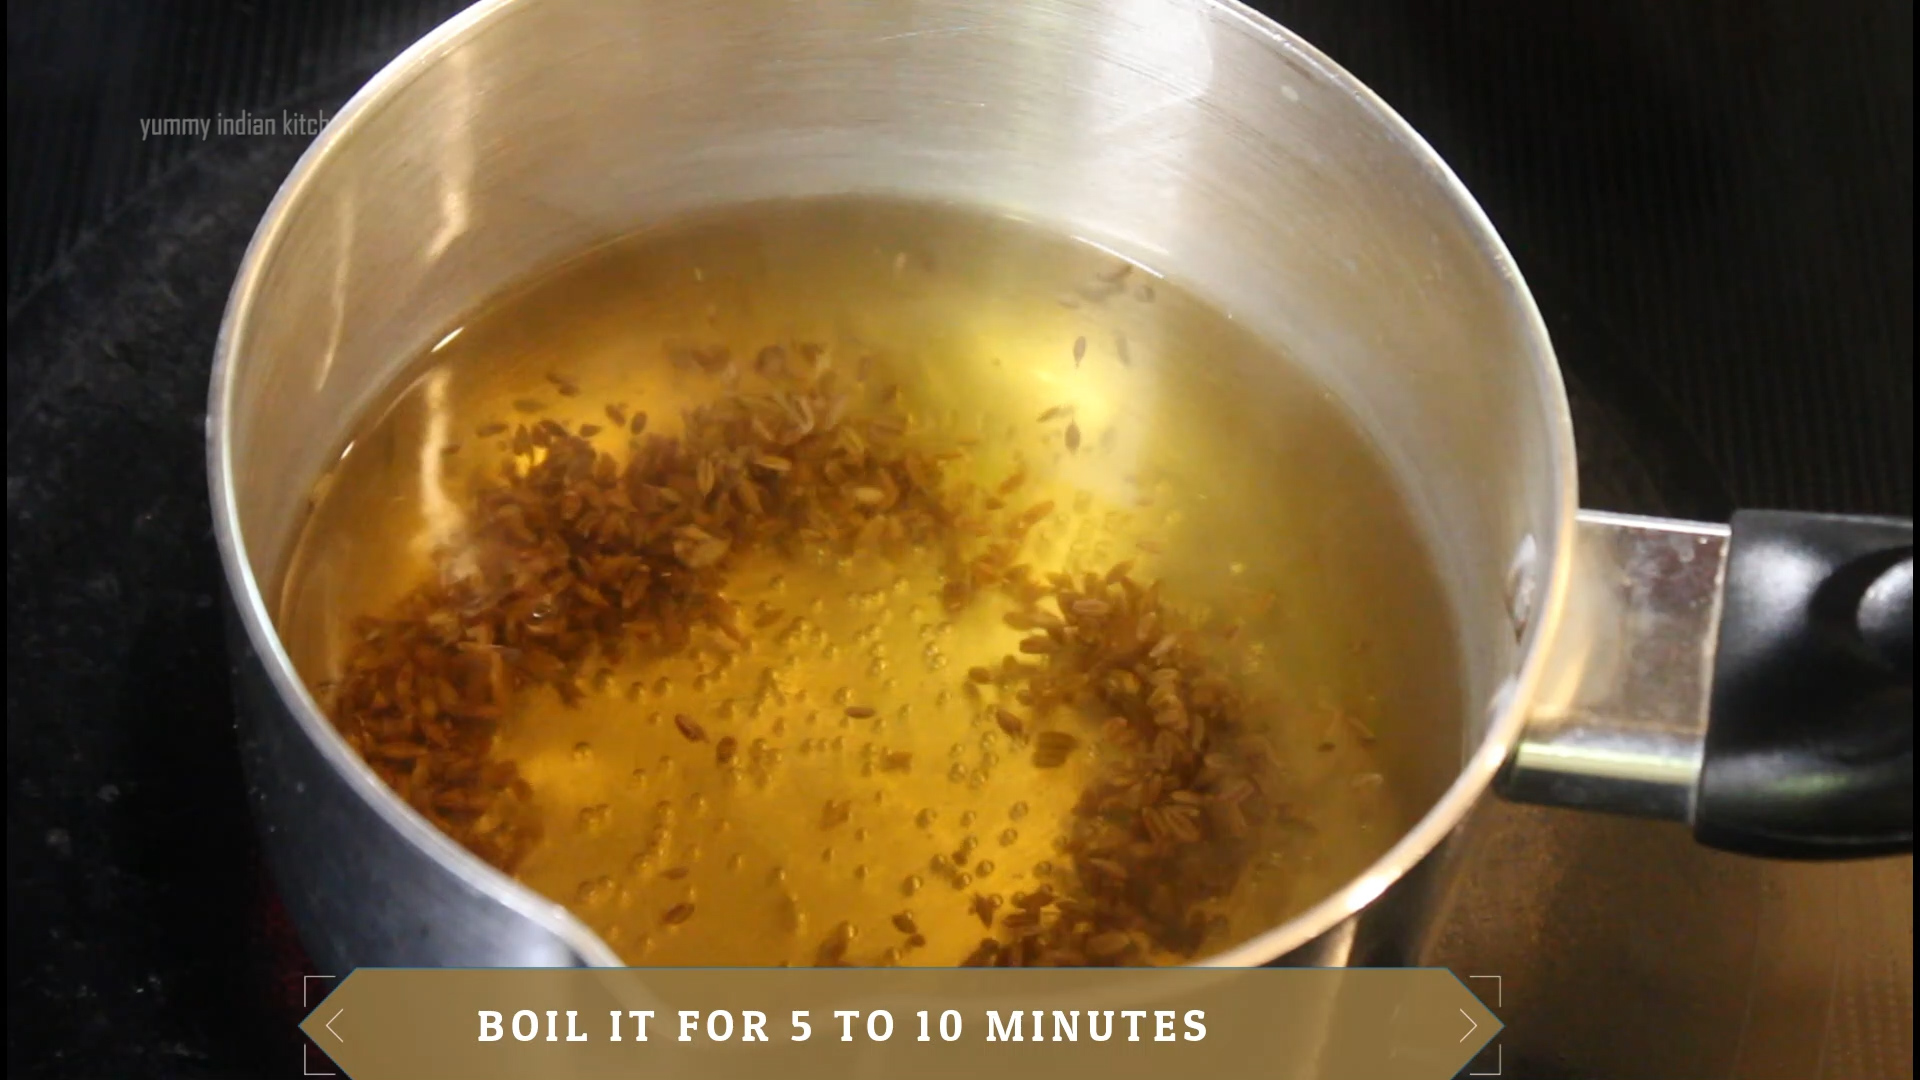 boiling the jeera seeds